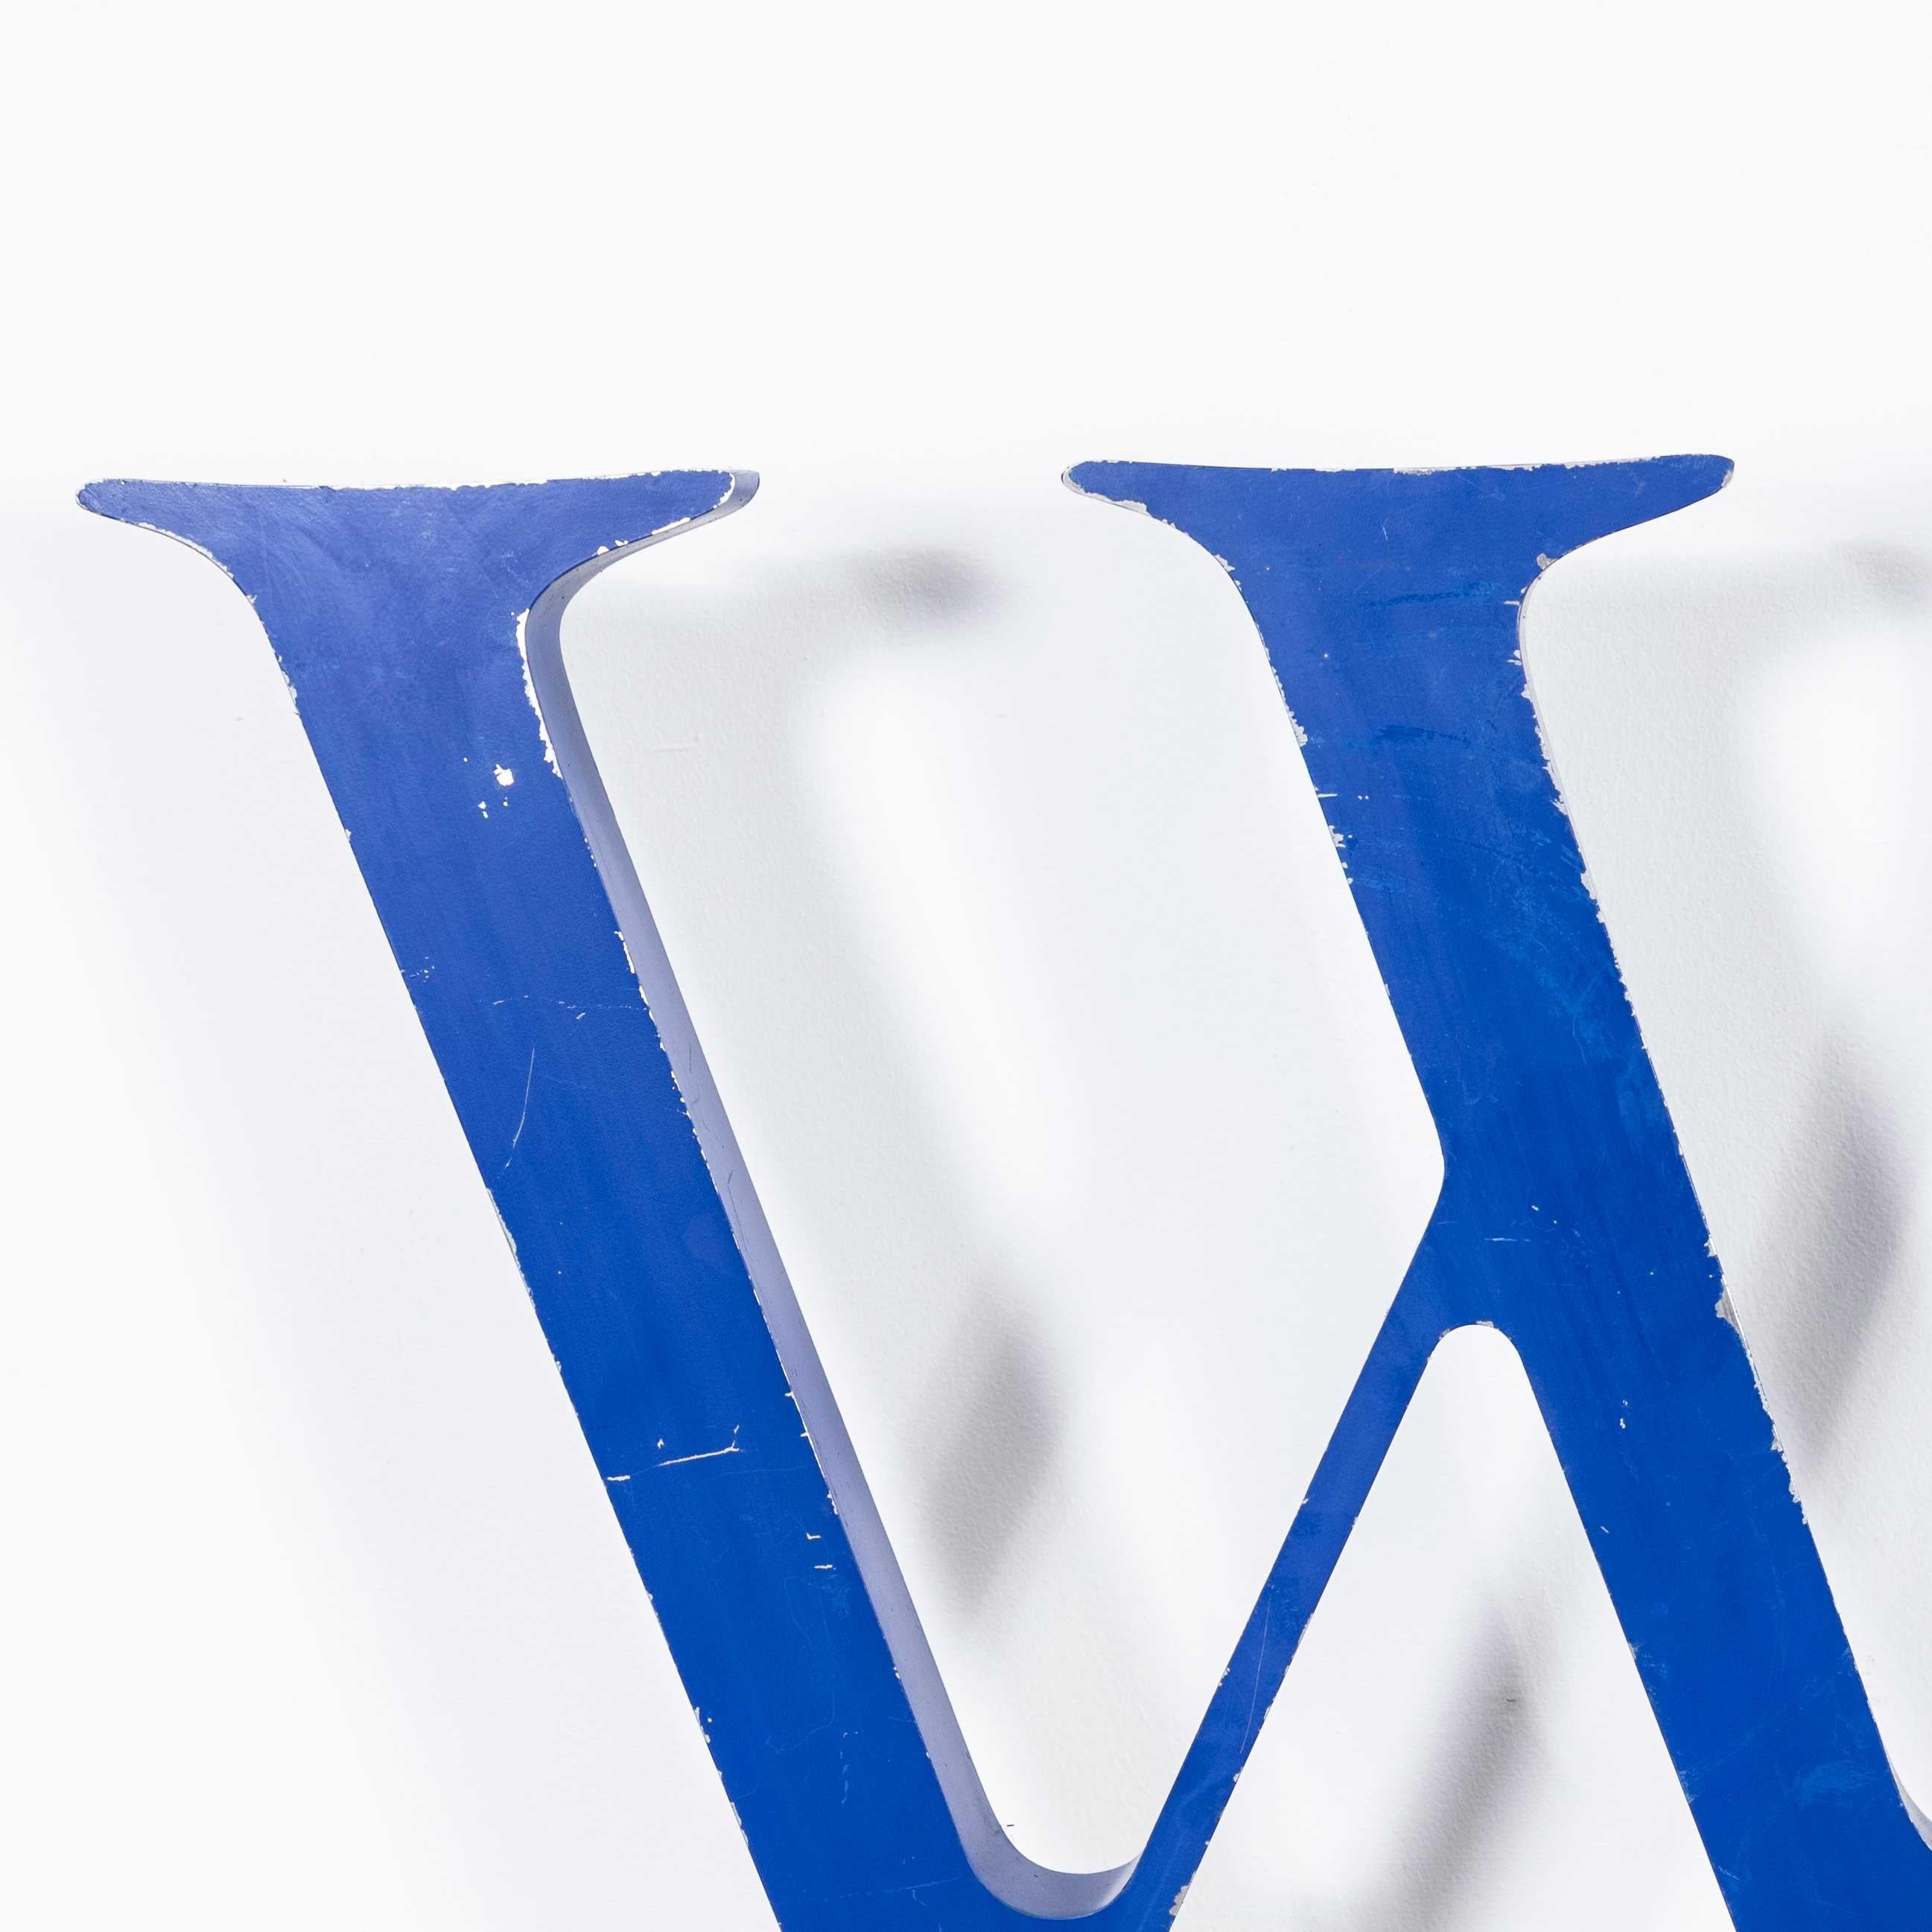 Vintage Blue Metal Letter – Large W
Vintage Blue Metal Letter -W. Good sized metal signage letter with faded original blue paint. Size 5x53x68 – D/H/W all cm.

WORKSHOP REPORT
Our workshop team inspect every product and carry out any needed repairs